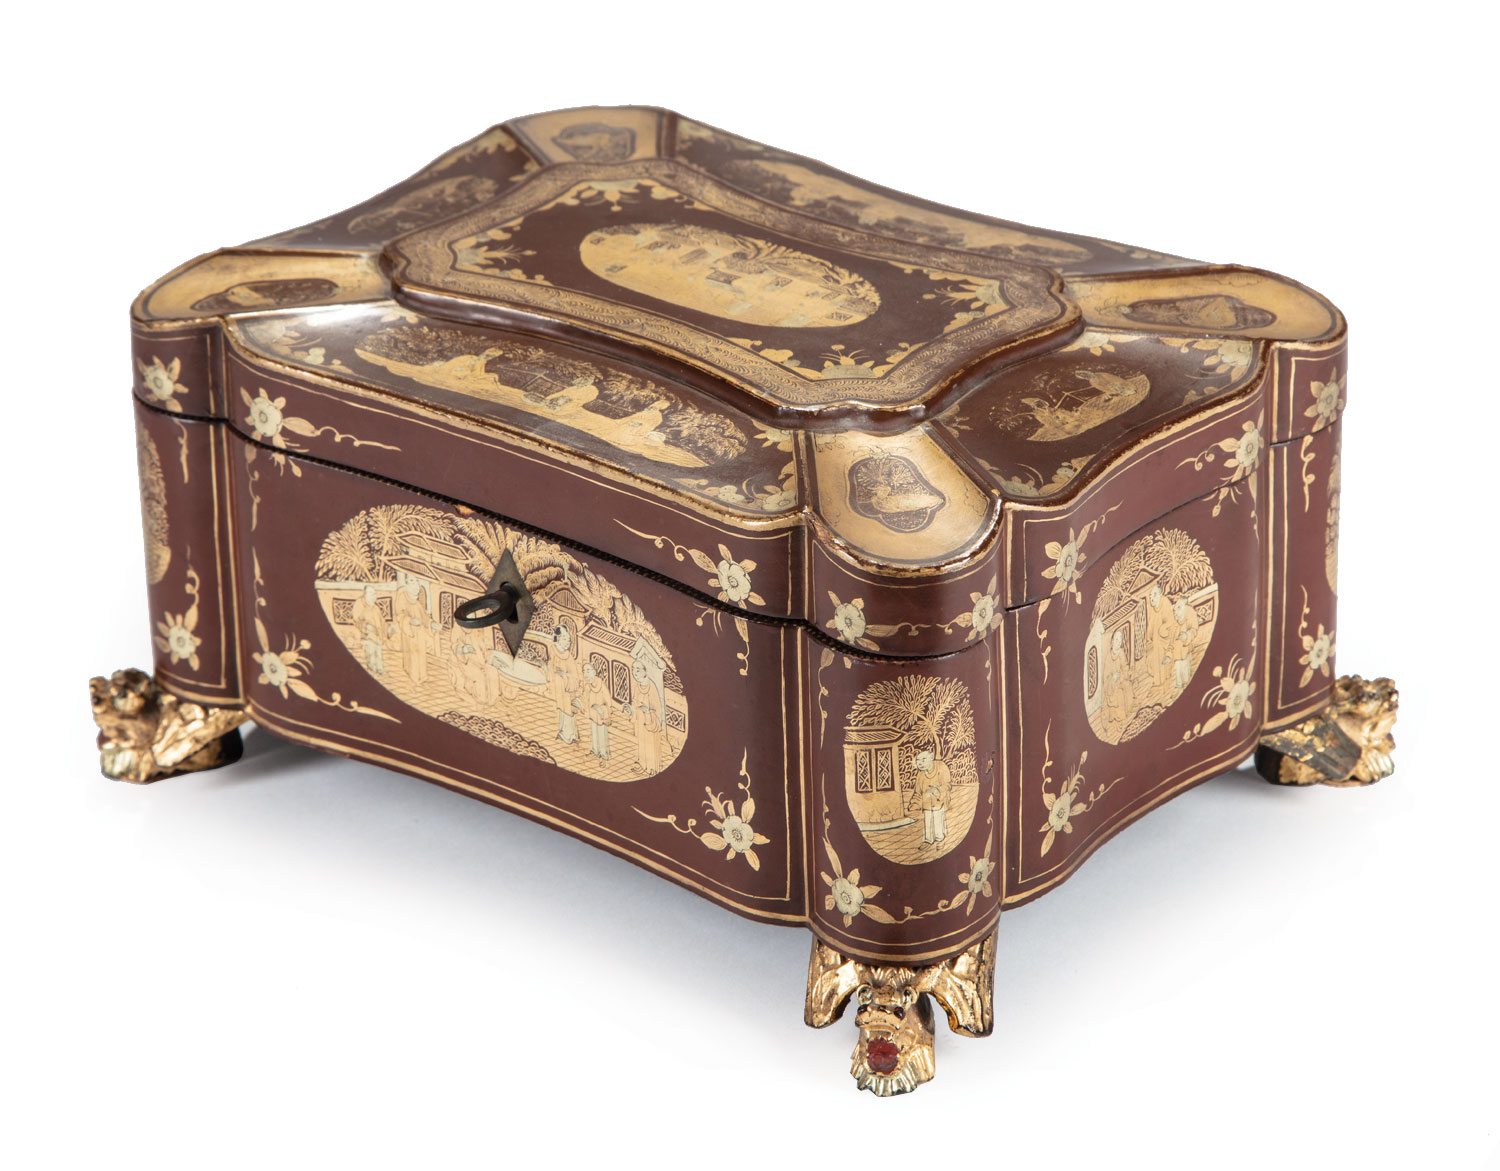 Chinese Gilt-Decorated Brown Lacquer Tea Caddy , 19th c., shaped rectangular form decorated with